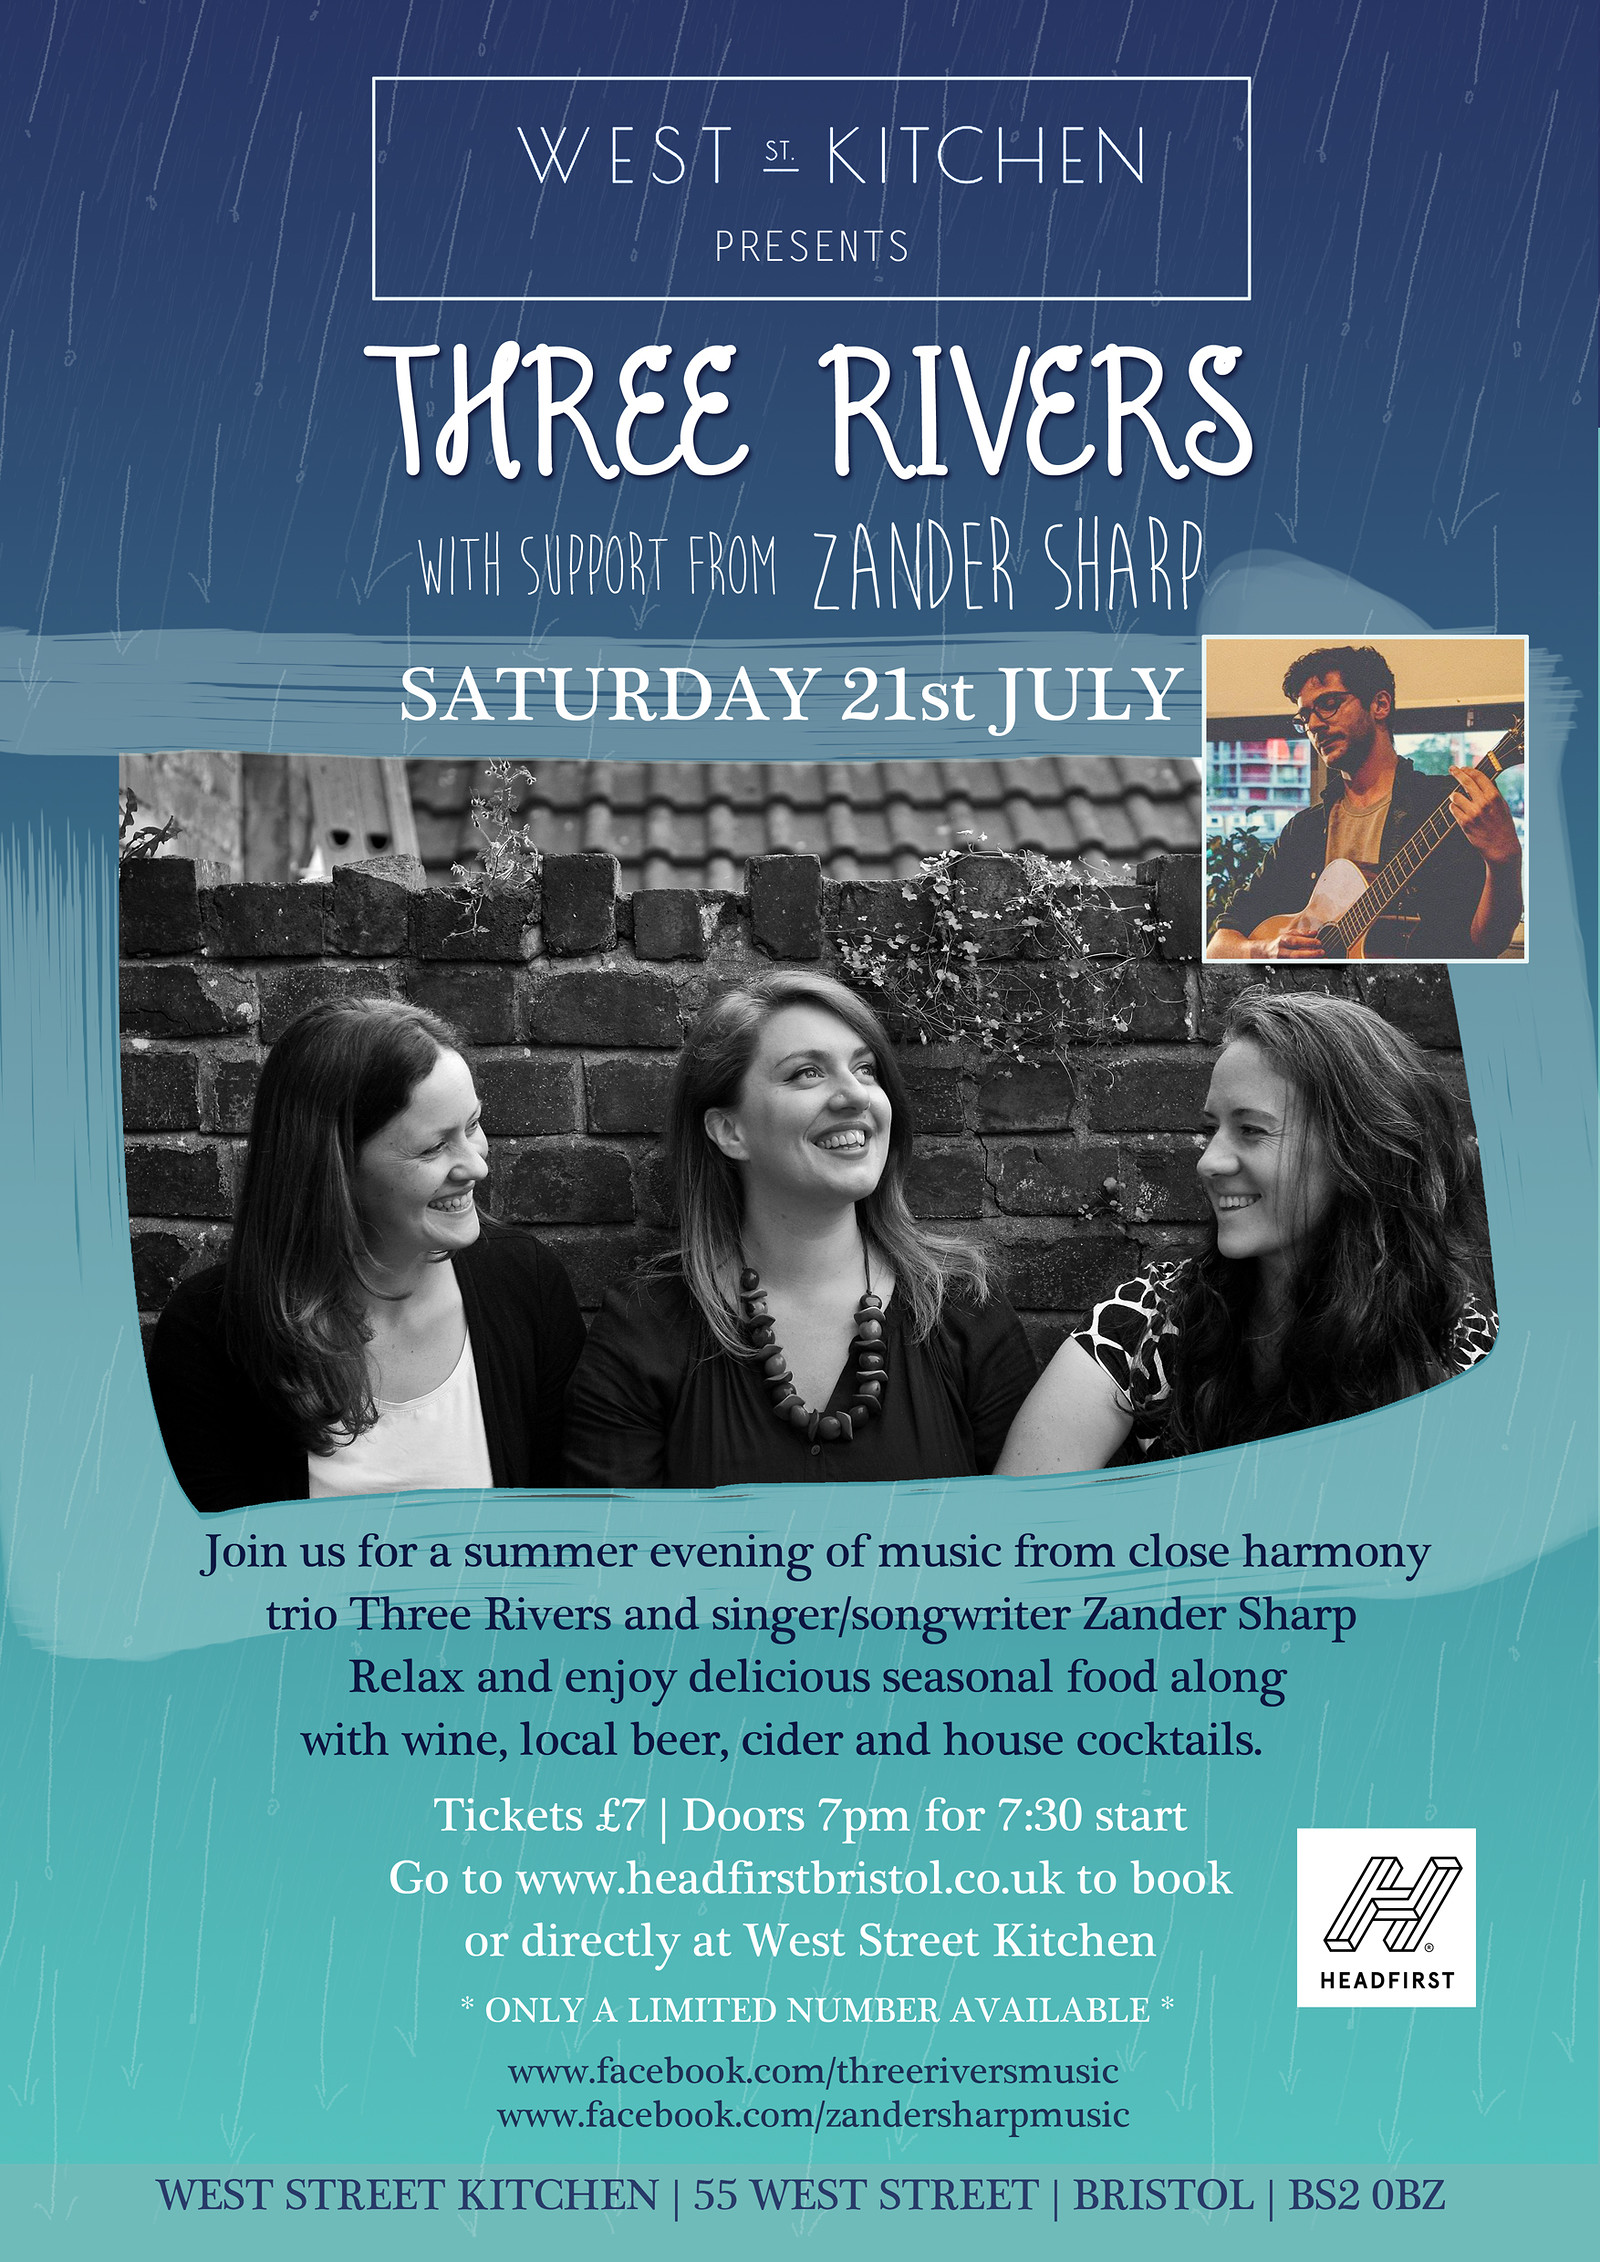 Three Rivers with support from Zander Sharp at West Street Kitchen